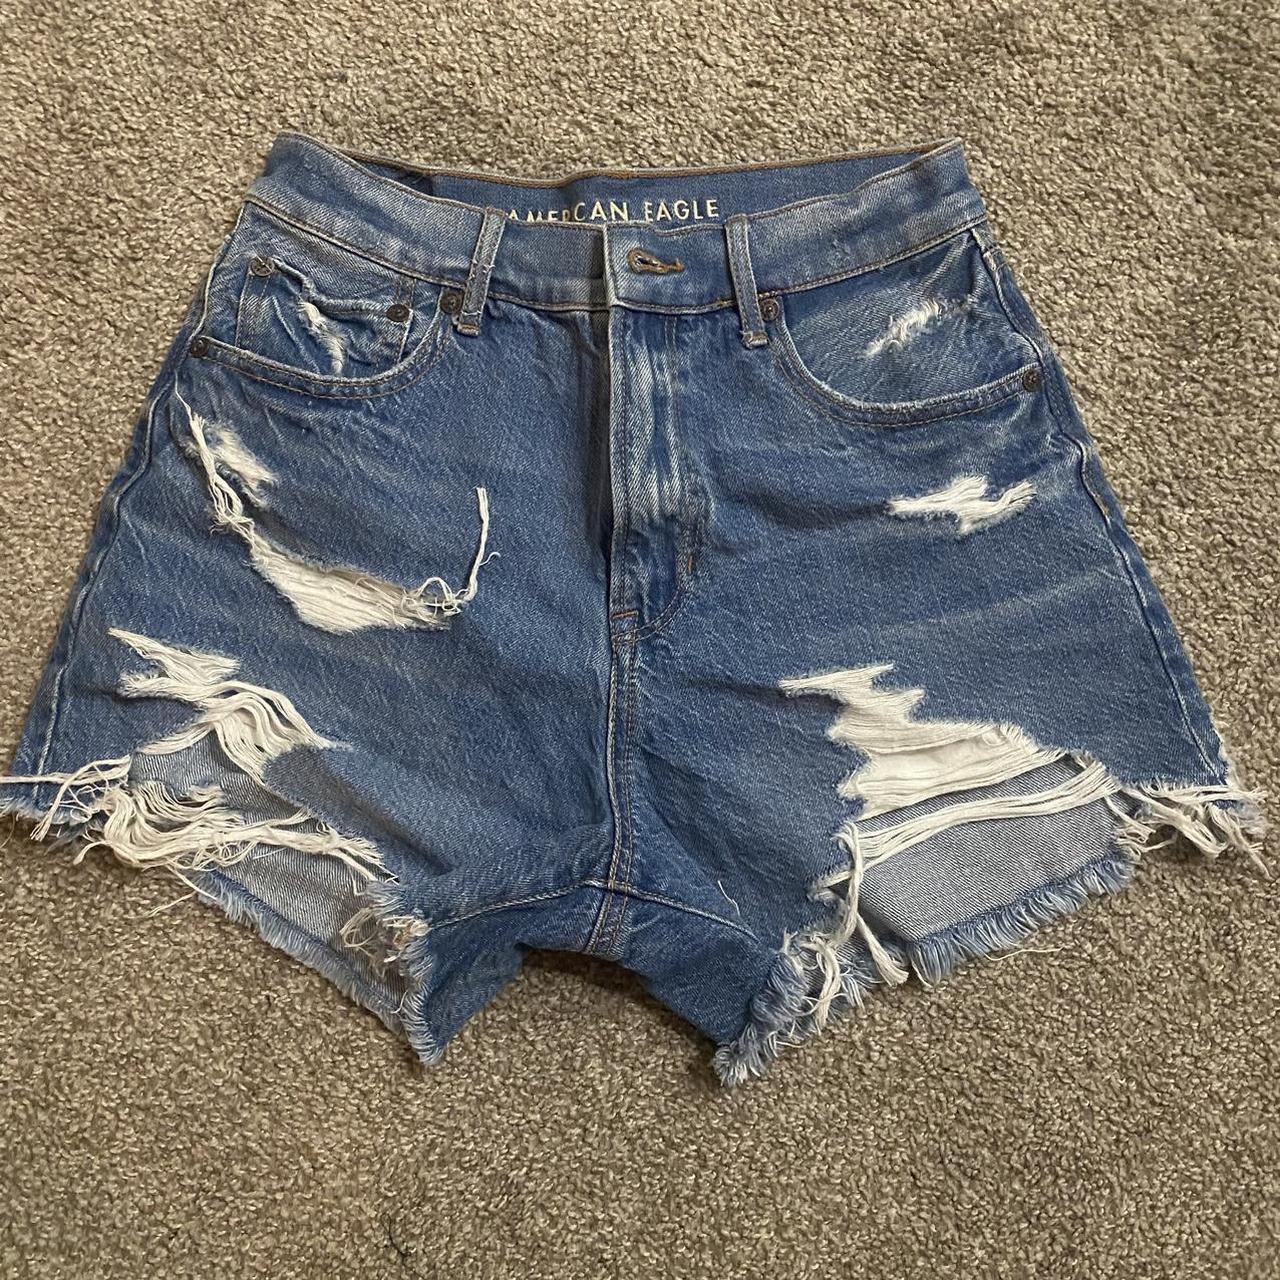 American Eagle Outfitters Women's Shorts